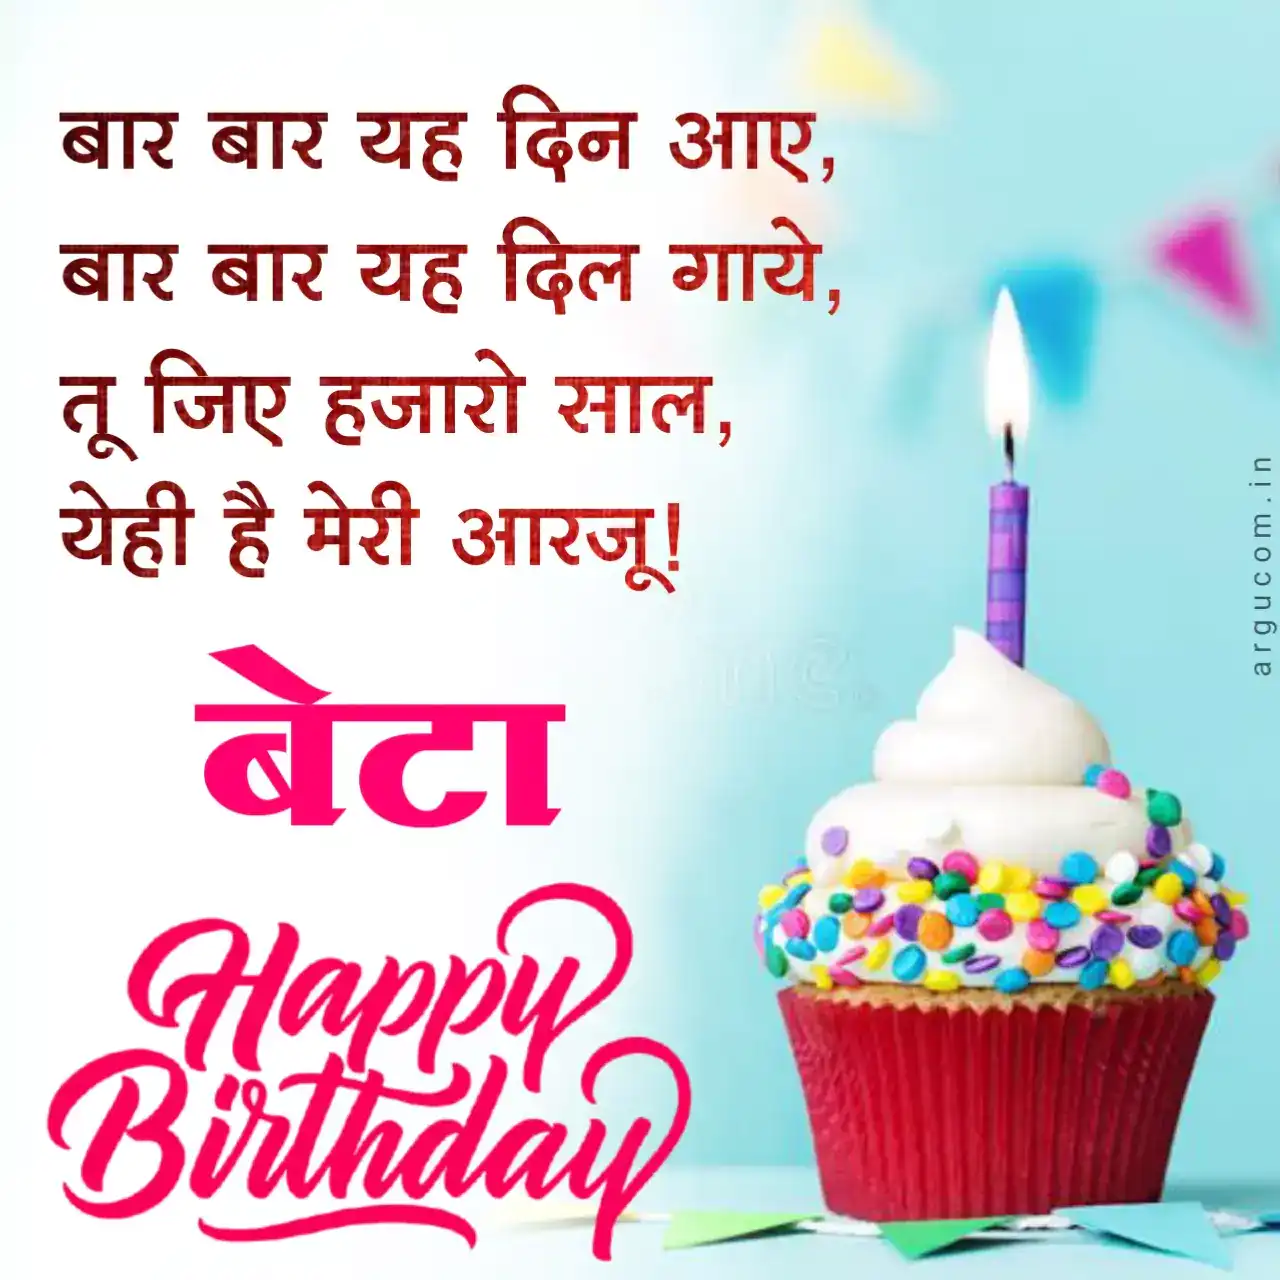 Happy birthday message for son in hindi